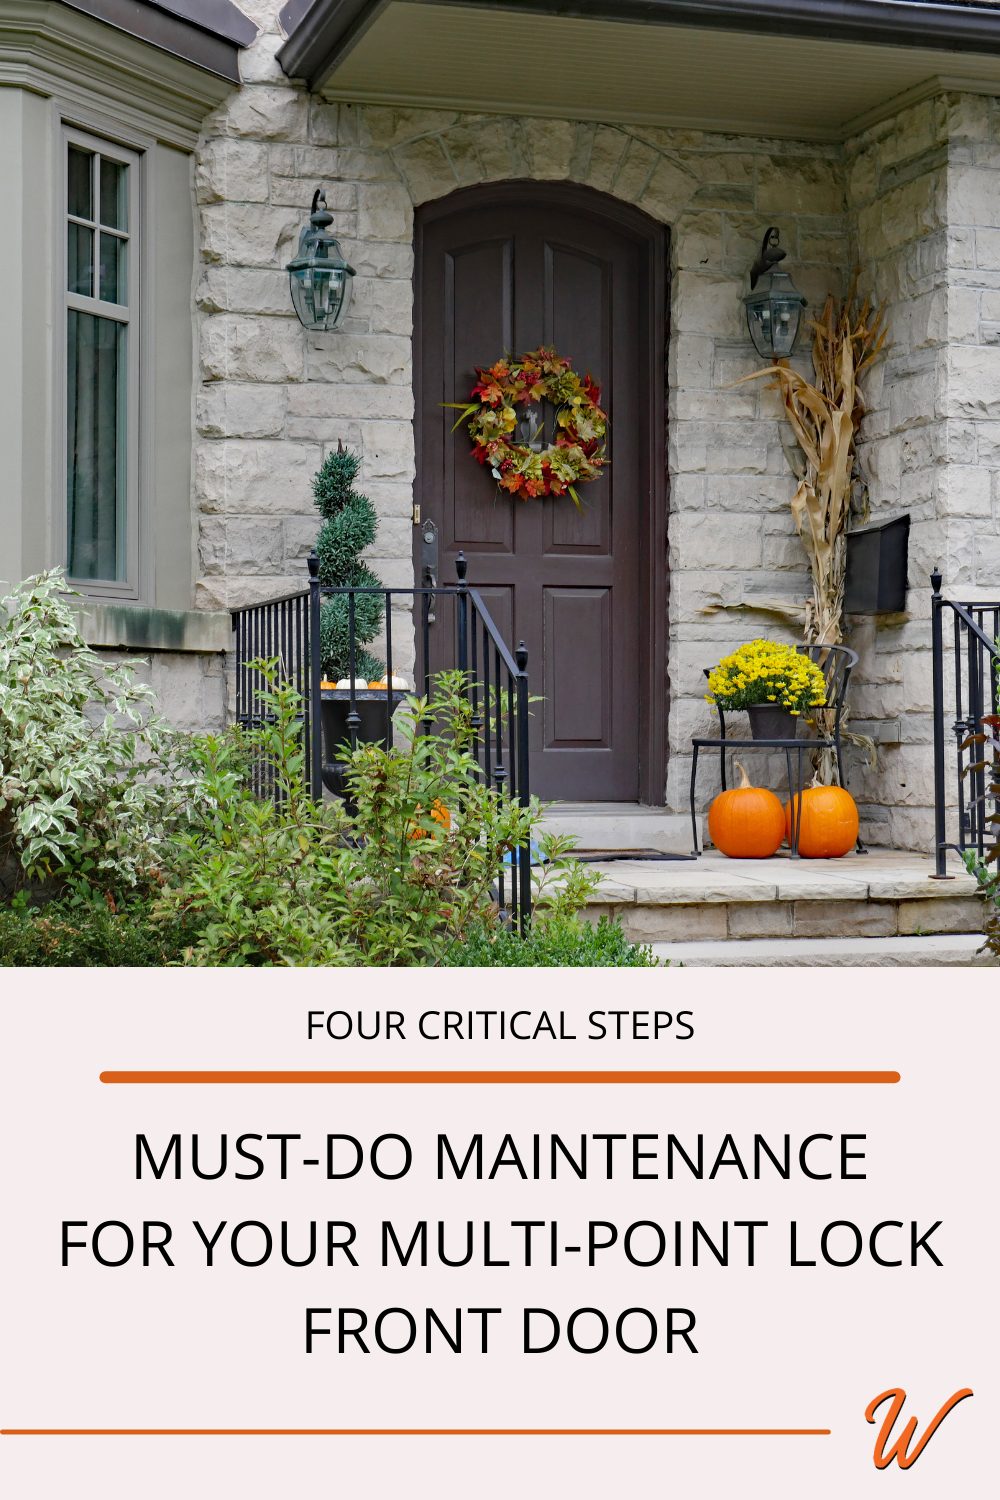 gray brick house with fall decor captioned with: "Four Critical Steps: Must-Do maintenance for your multi-point lock front door"